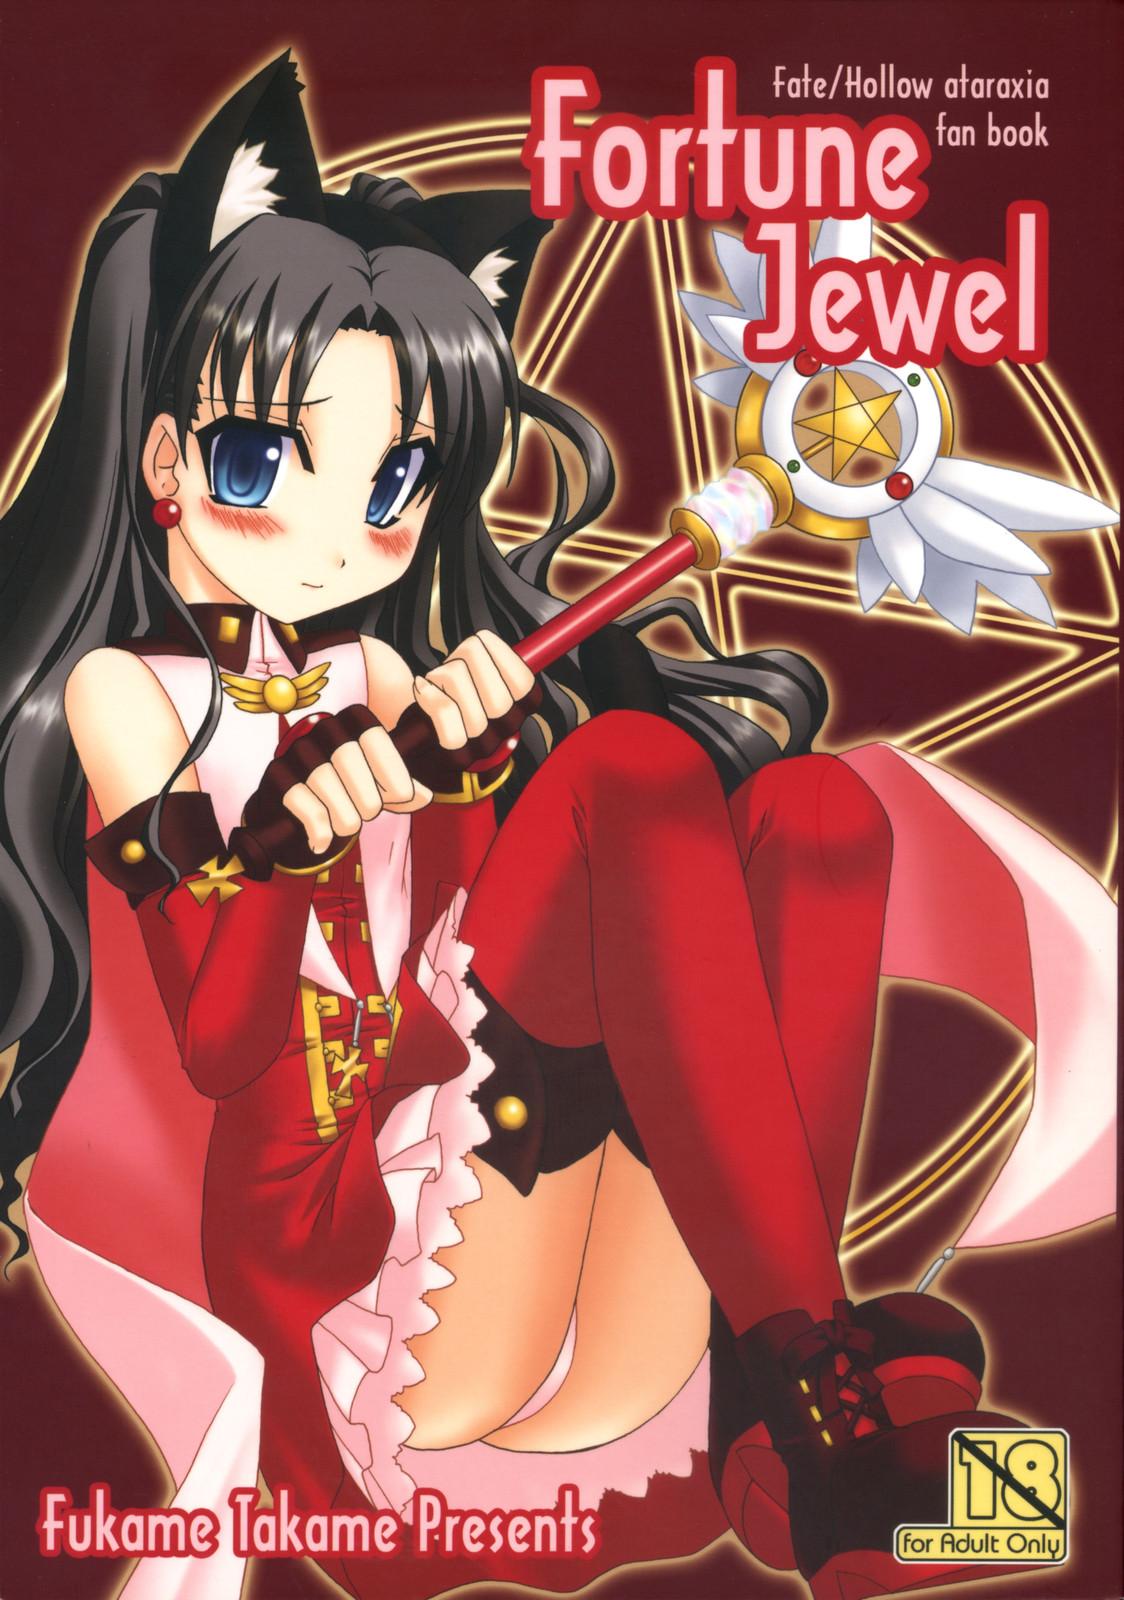 Workout Fortune Jewel - Fate stay night Fate hollow ataraxia Tinder - Picture 1